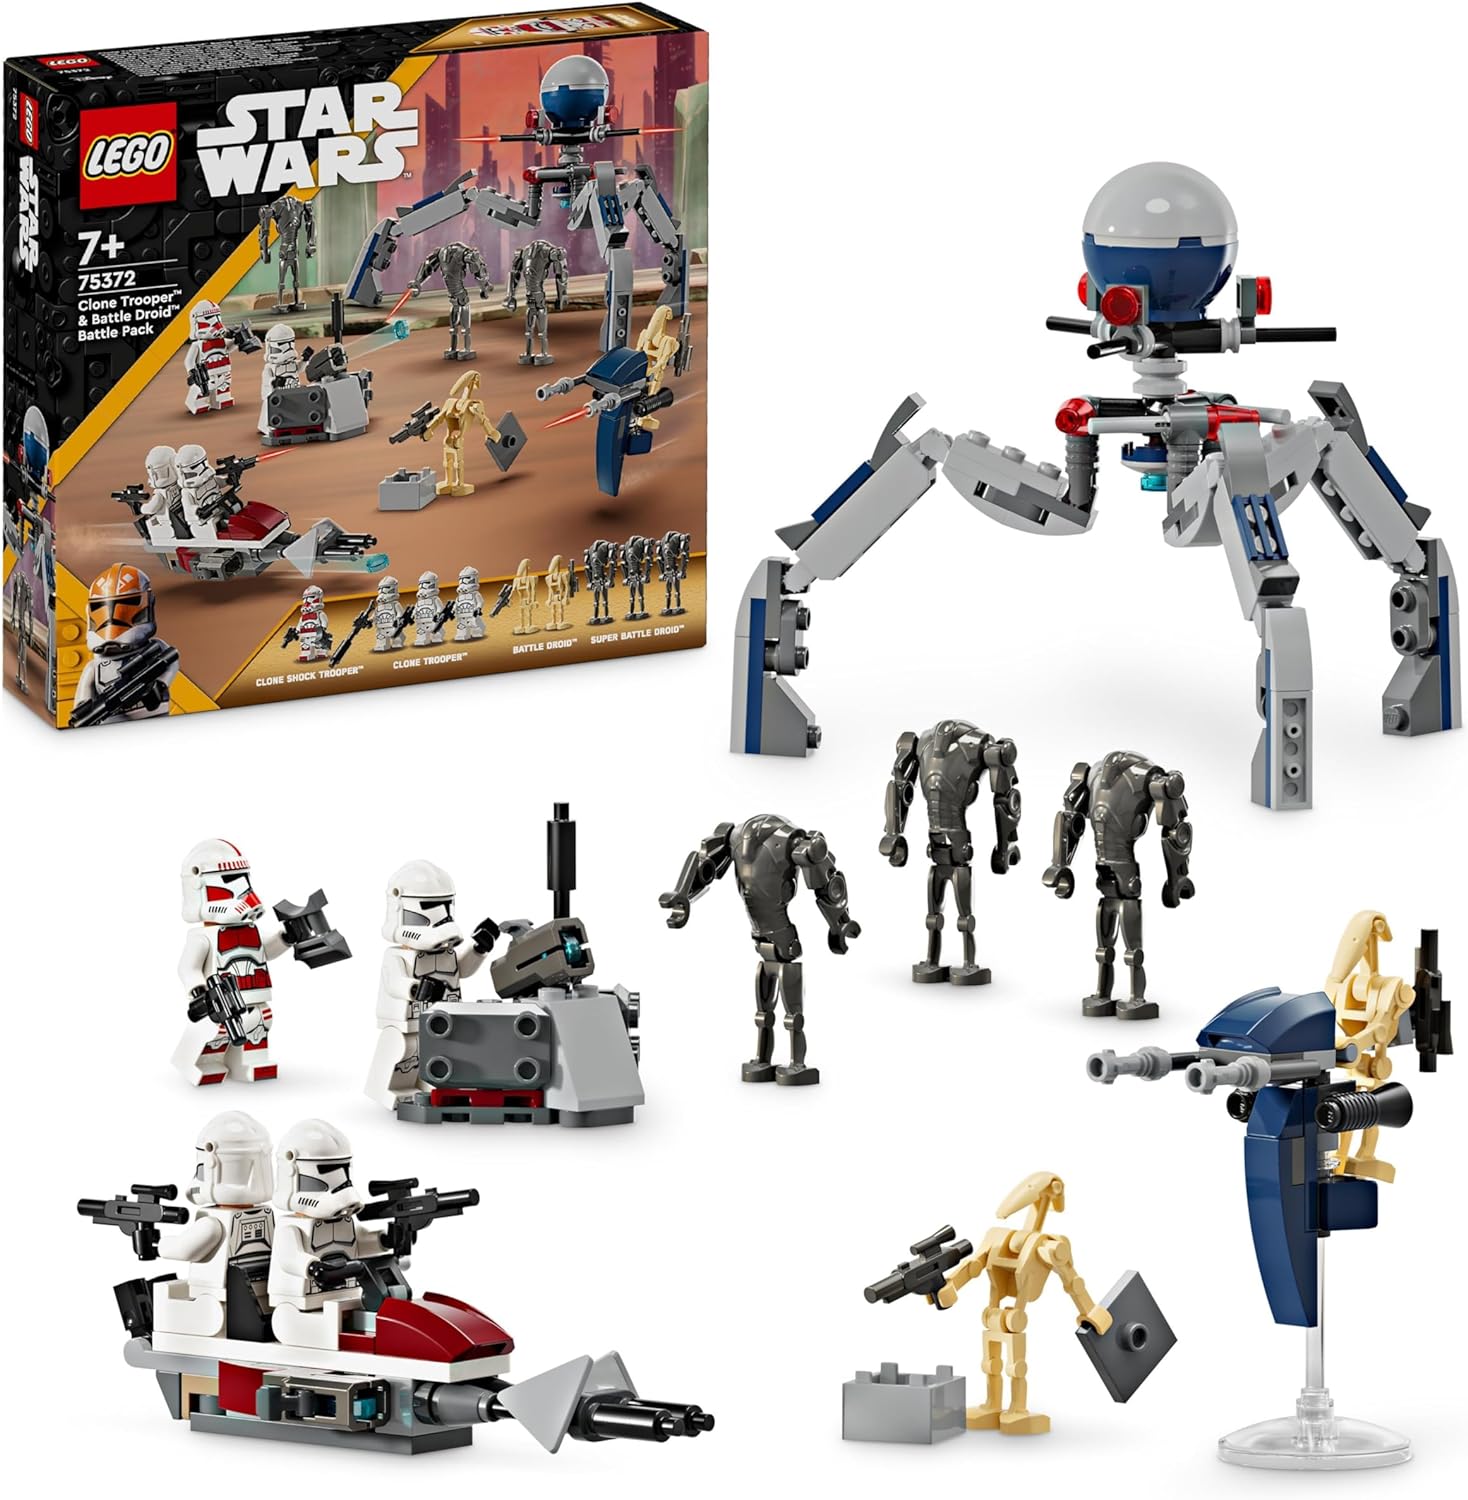 LEGO Star Wars Clone Trooper & Battle Droid Battle Pack, Toy for Children with Buildable Speeder Bike, Tri Droid Figures and Defense Posts, Gift for Boys and Girls from 7 Years, 75372